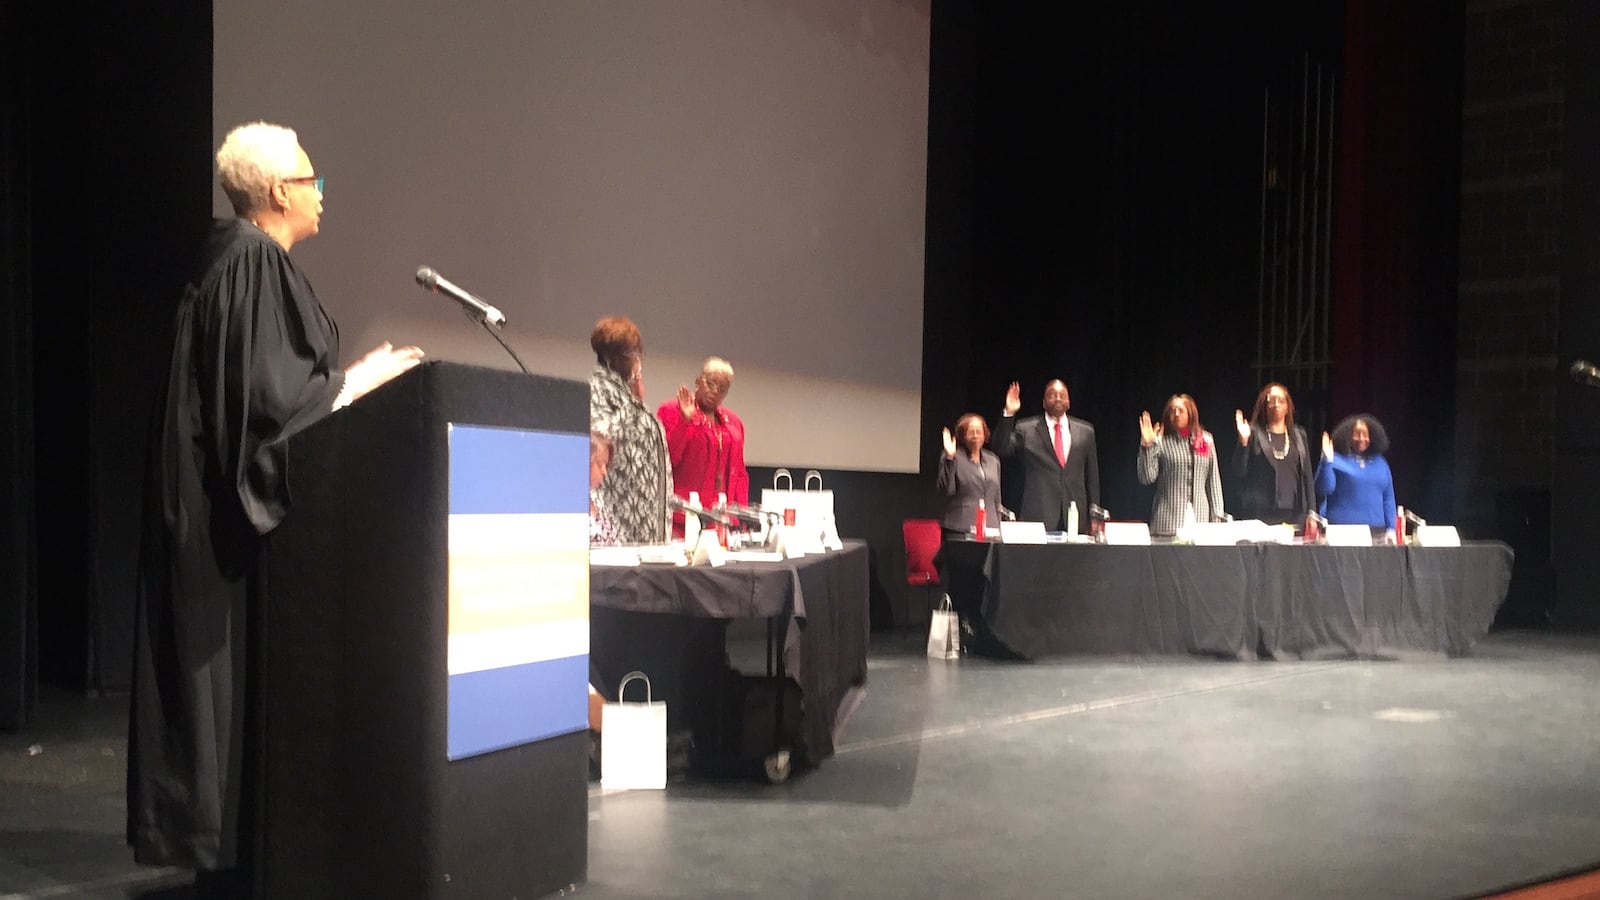 The seven members of the new Detroit school board were sworn in during their first meeting at Cass Tech high school.